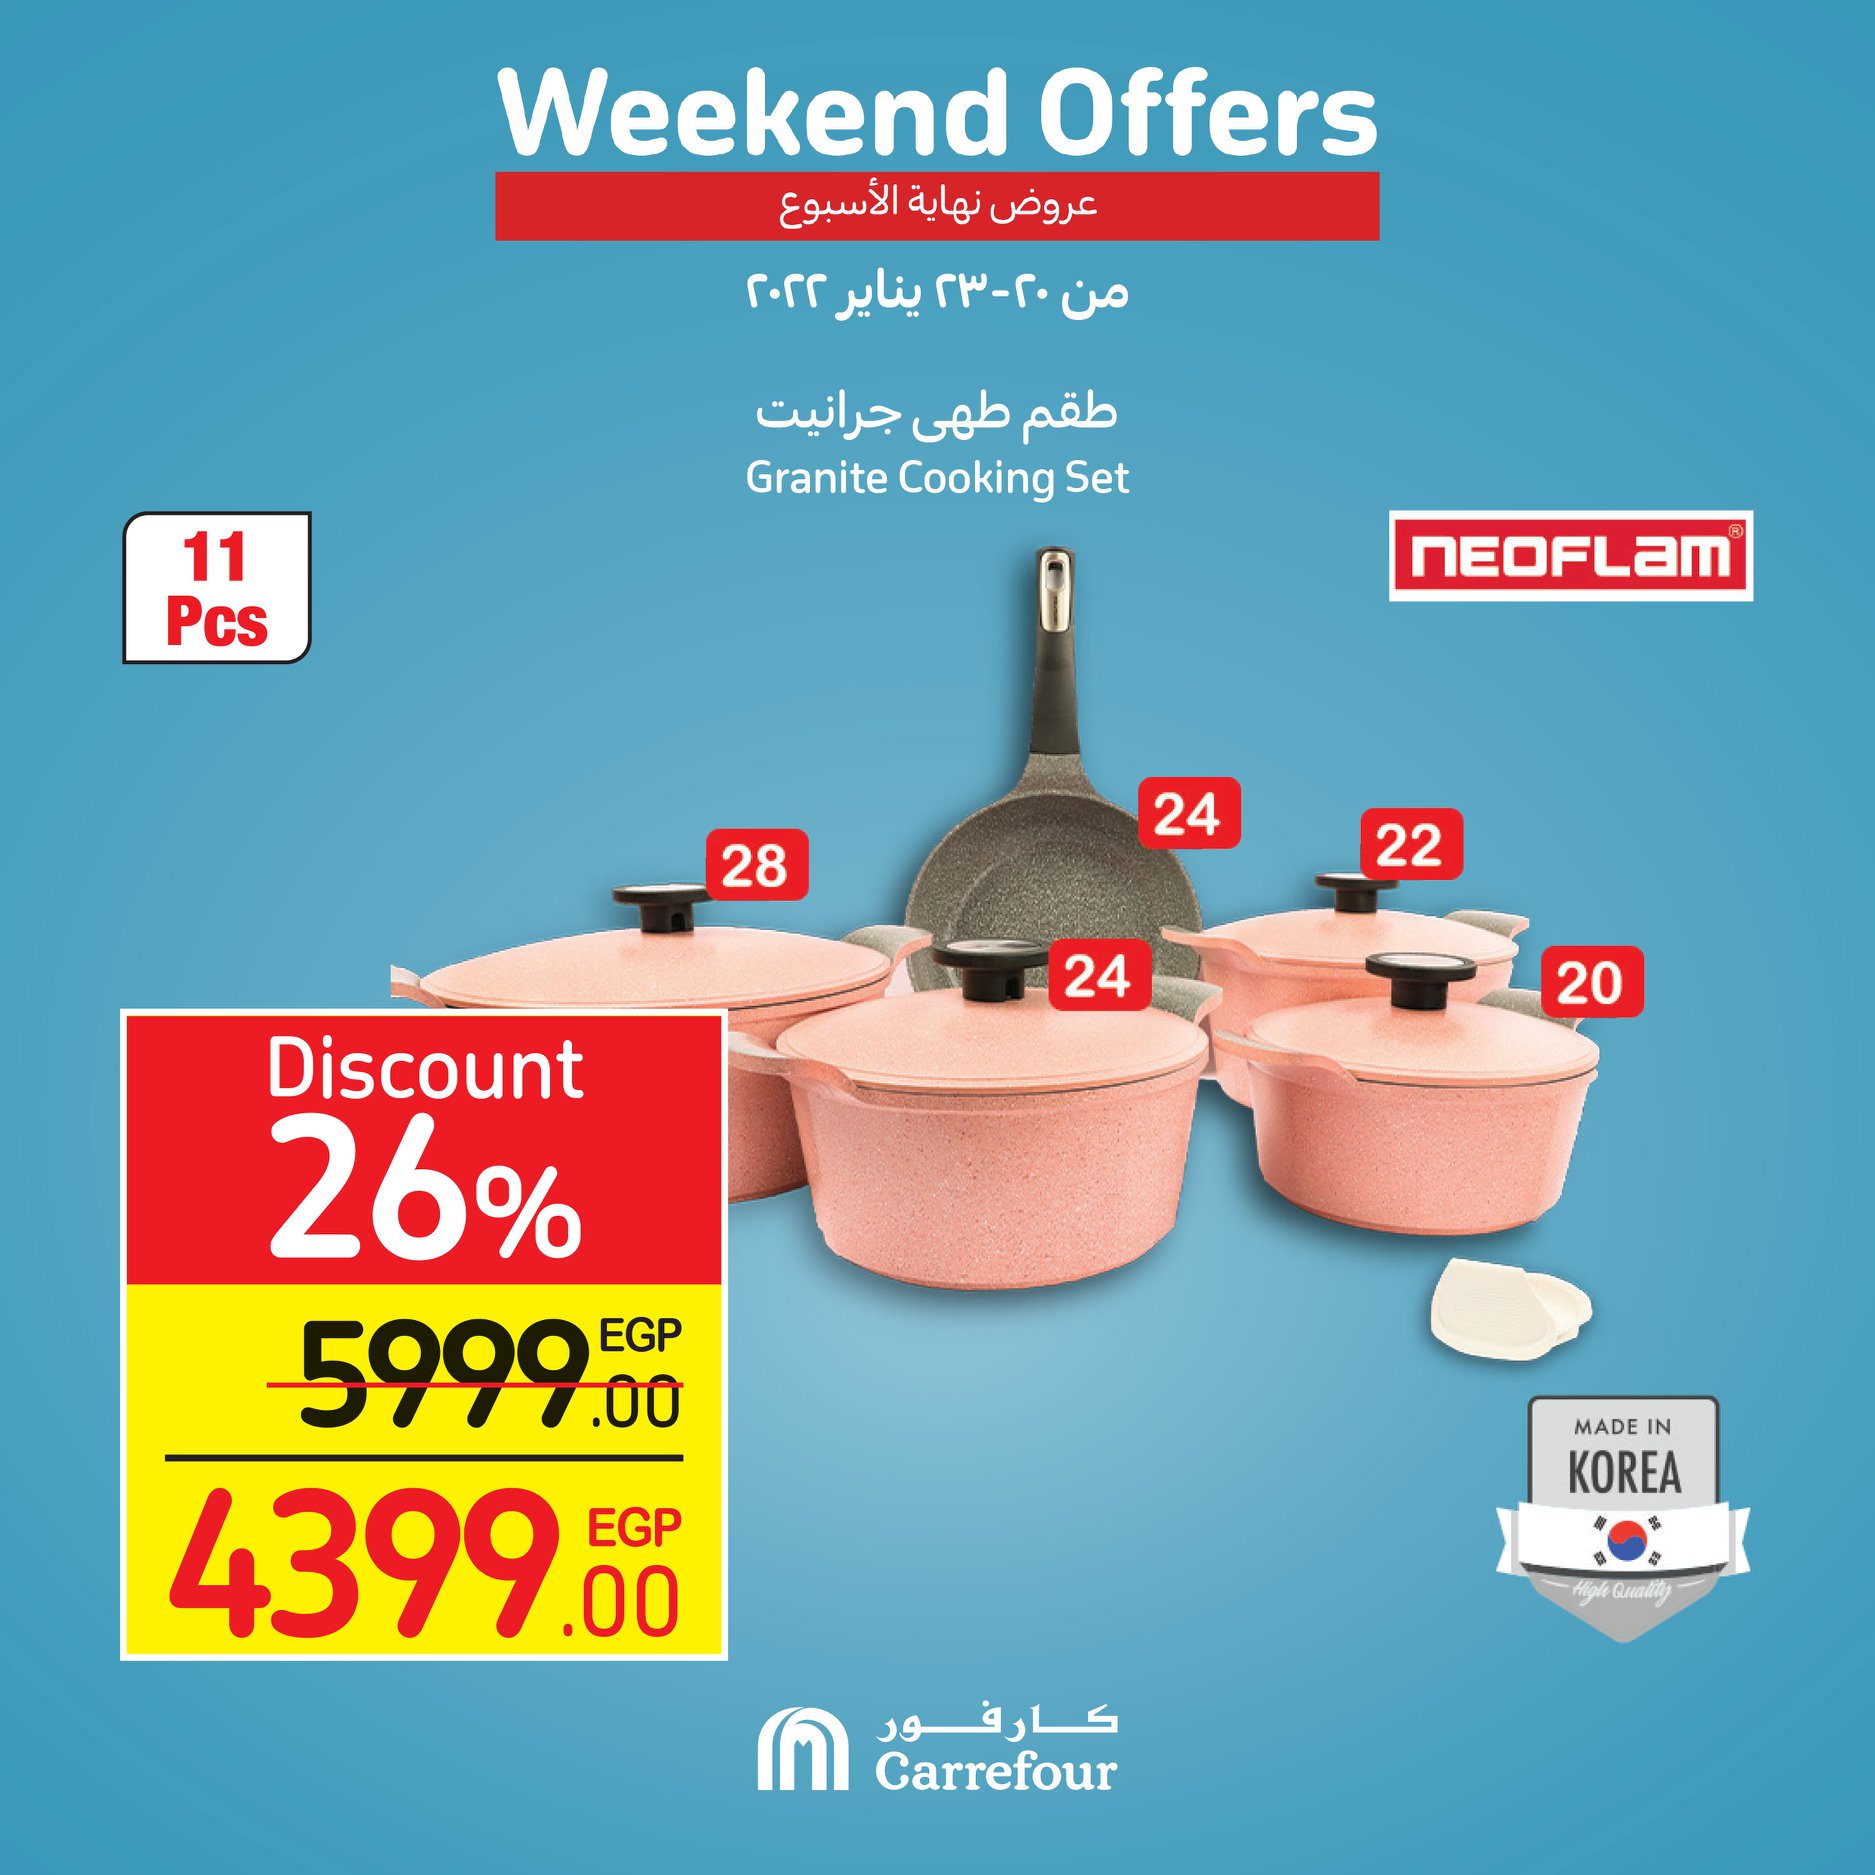 Watch Carrefour's gifts and surprises at Weekend and dirt cheap prices 22